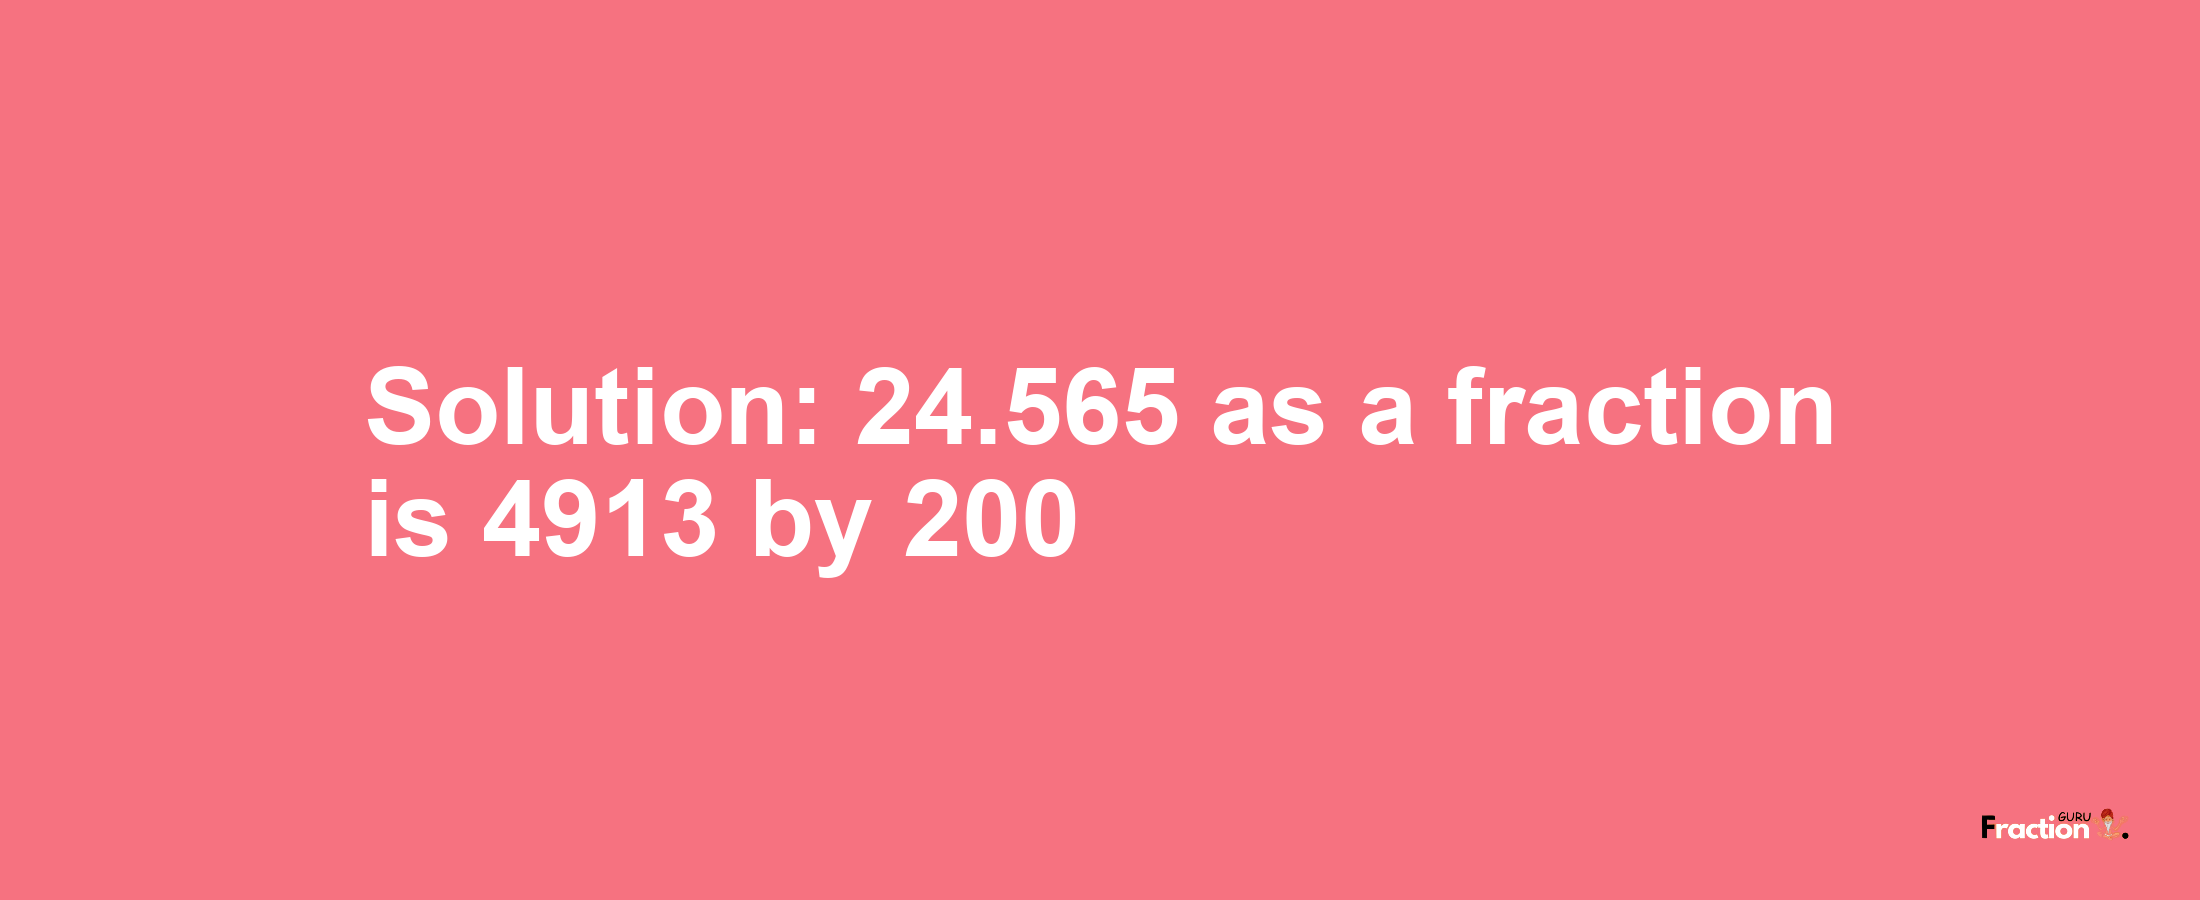 Solution:24.565 as a fraction is 4913/200